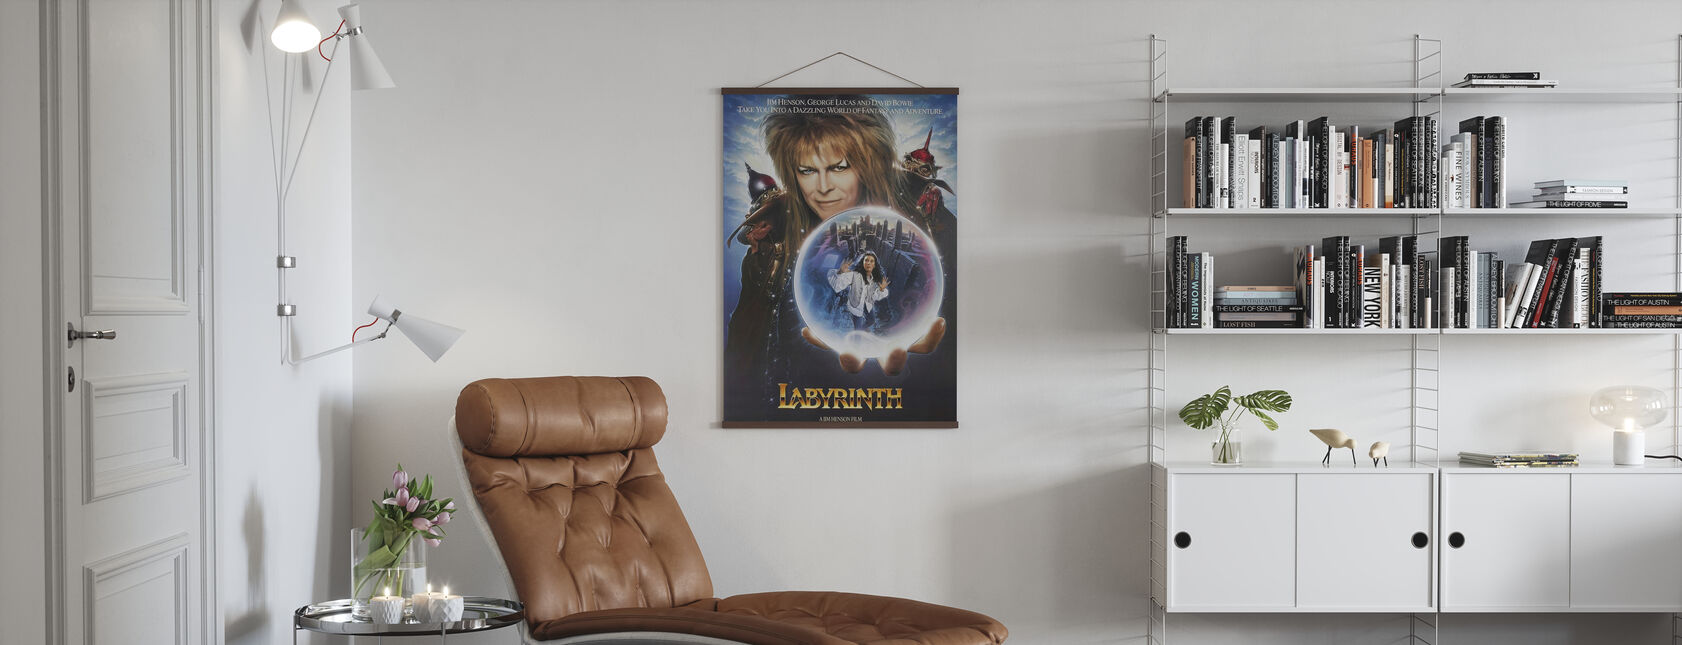 Labyrinth - Poster - Living Room